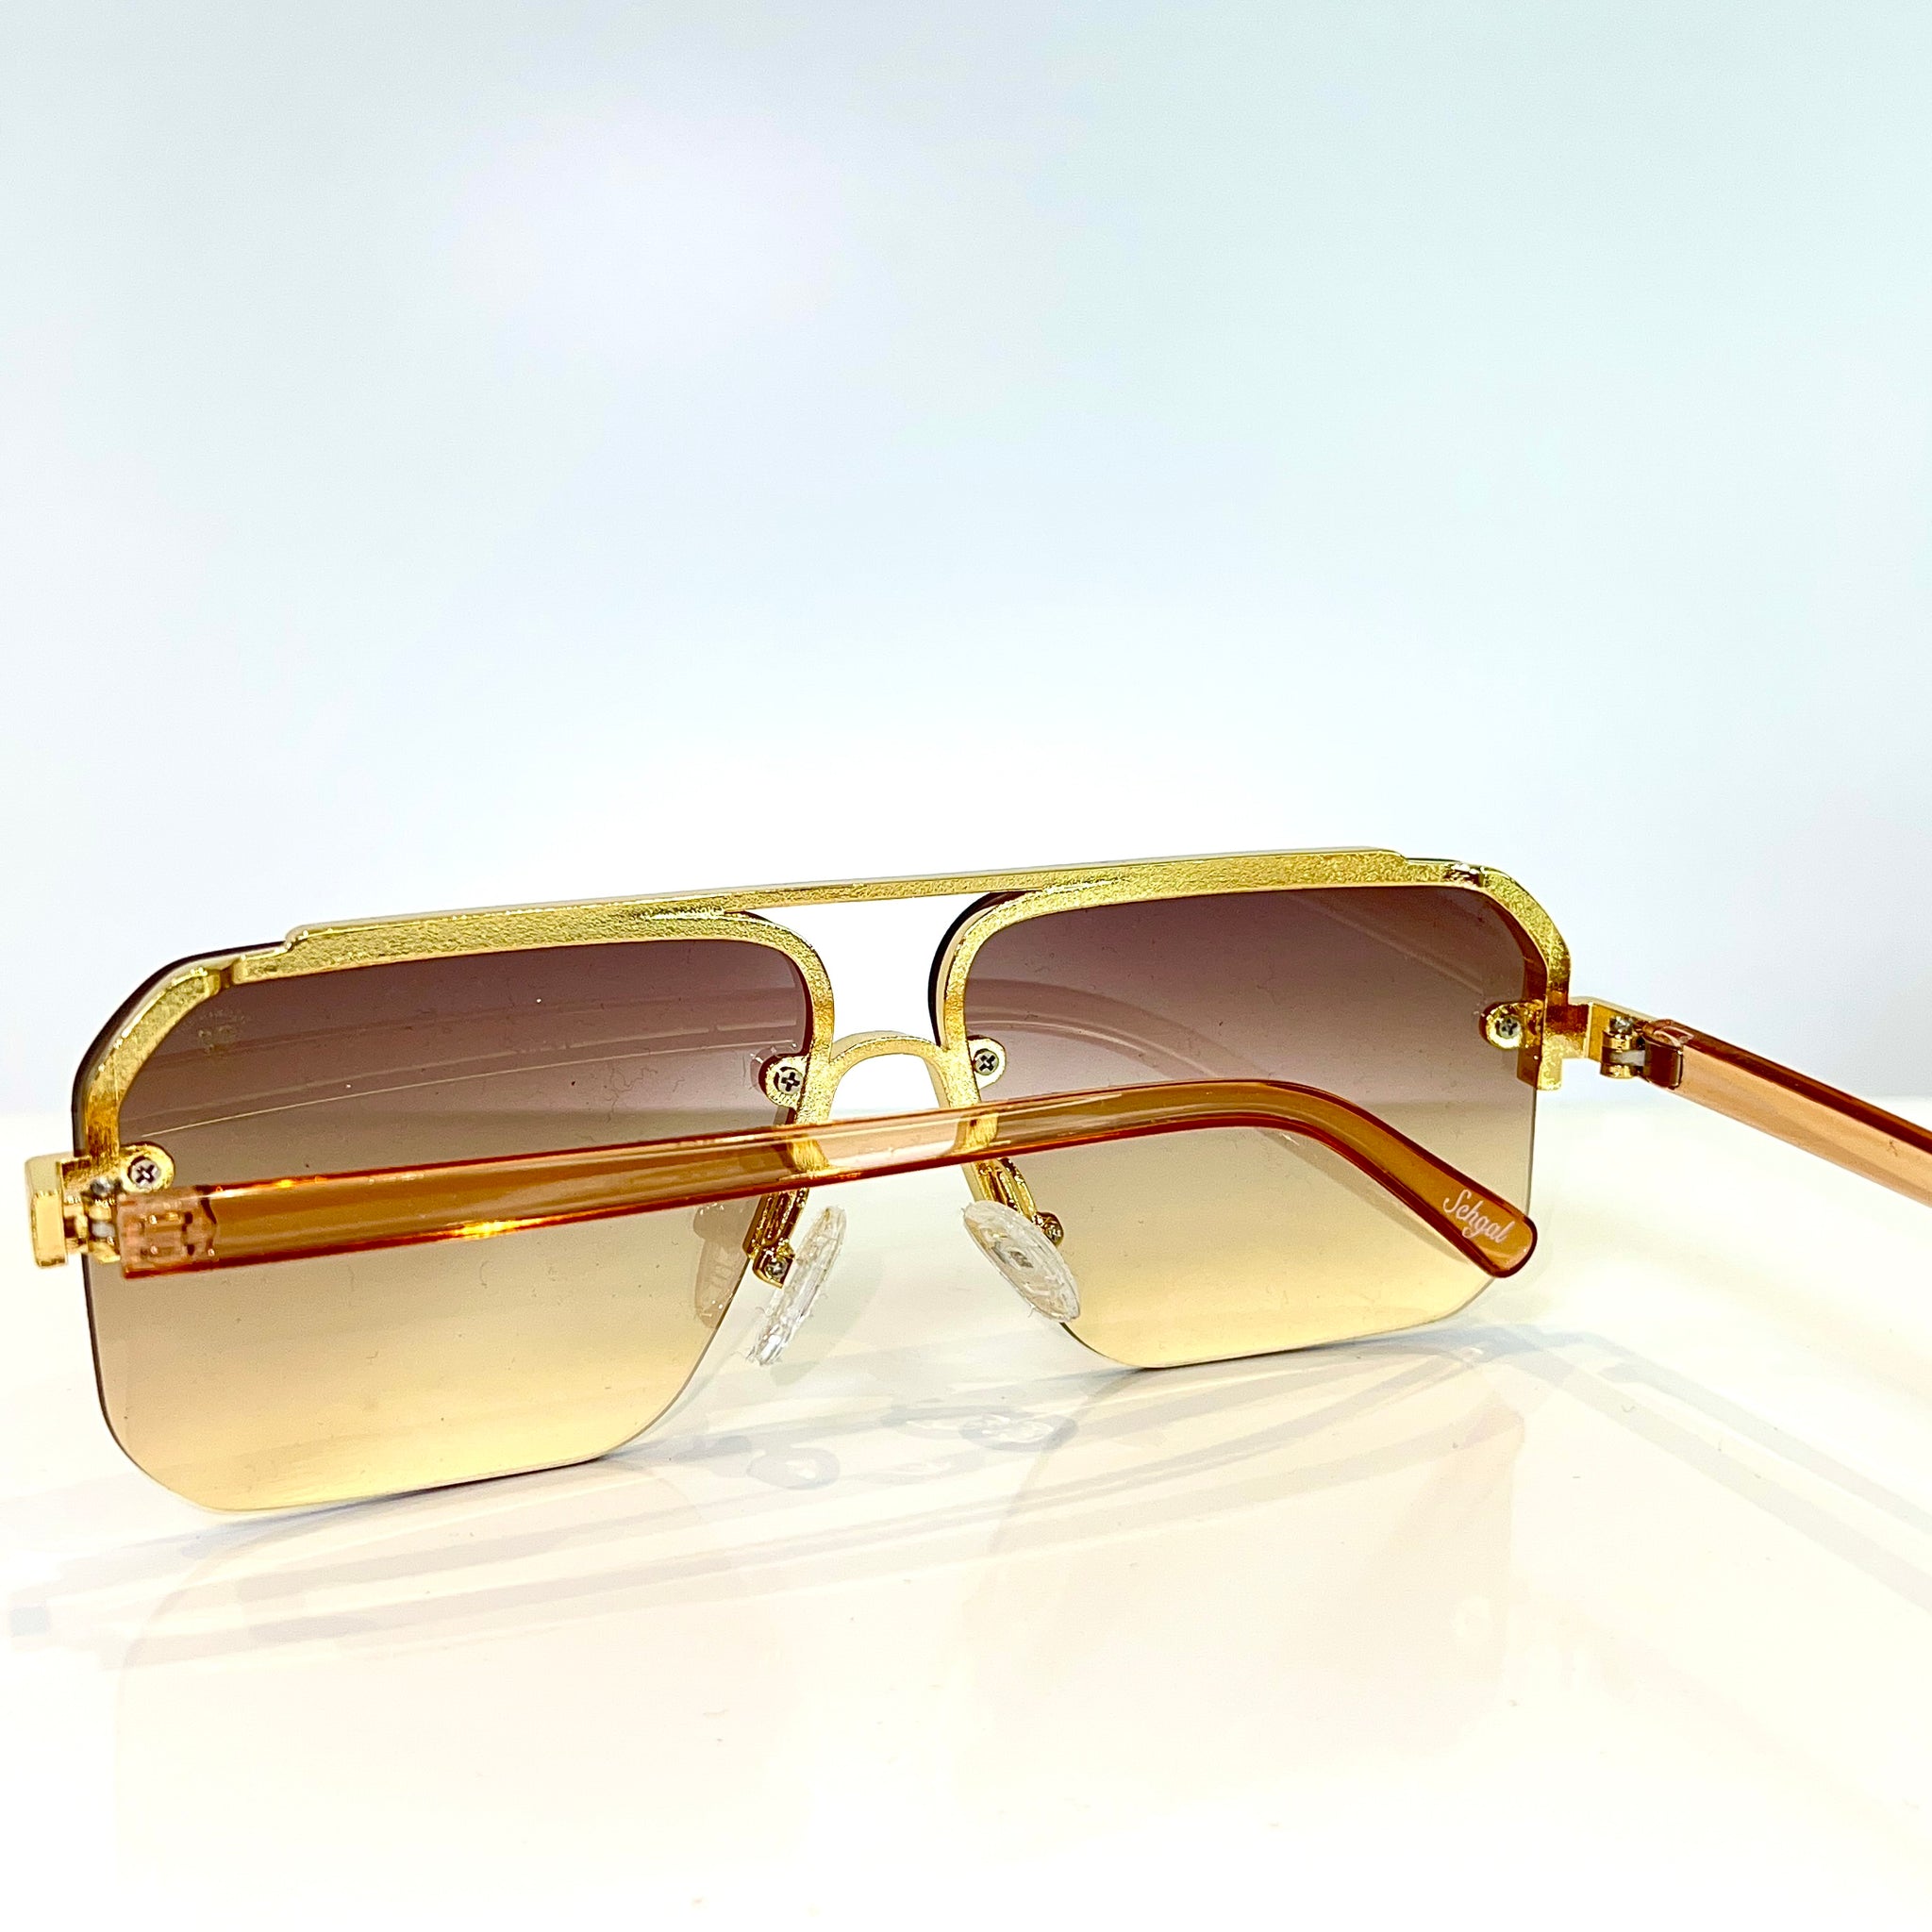 Mafiso Glasses - 14 carat gold plated -  Brown Shade